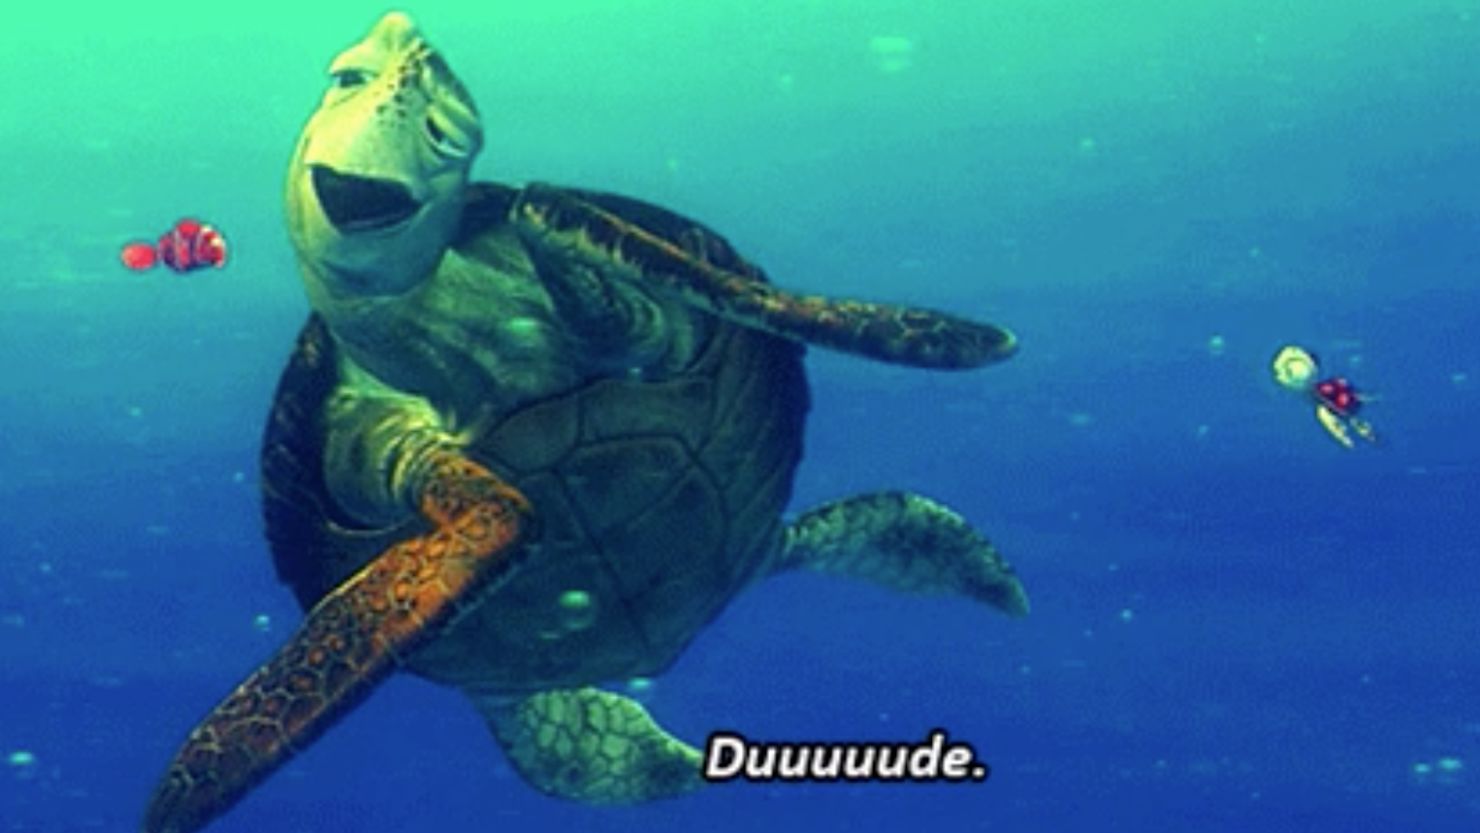 The sea turtle Crush in "Finding Nemo" spoke like a surfer dude, elongating his words. Thanks to social media, scientists have been studying usage of stretched words.